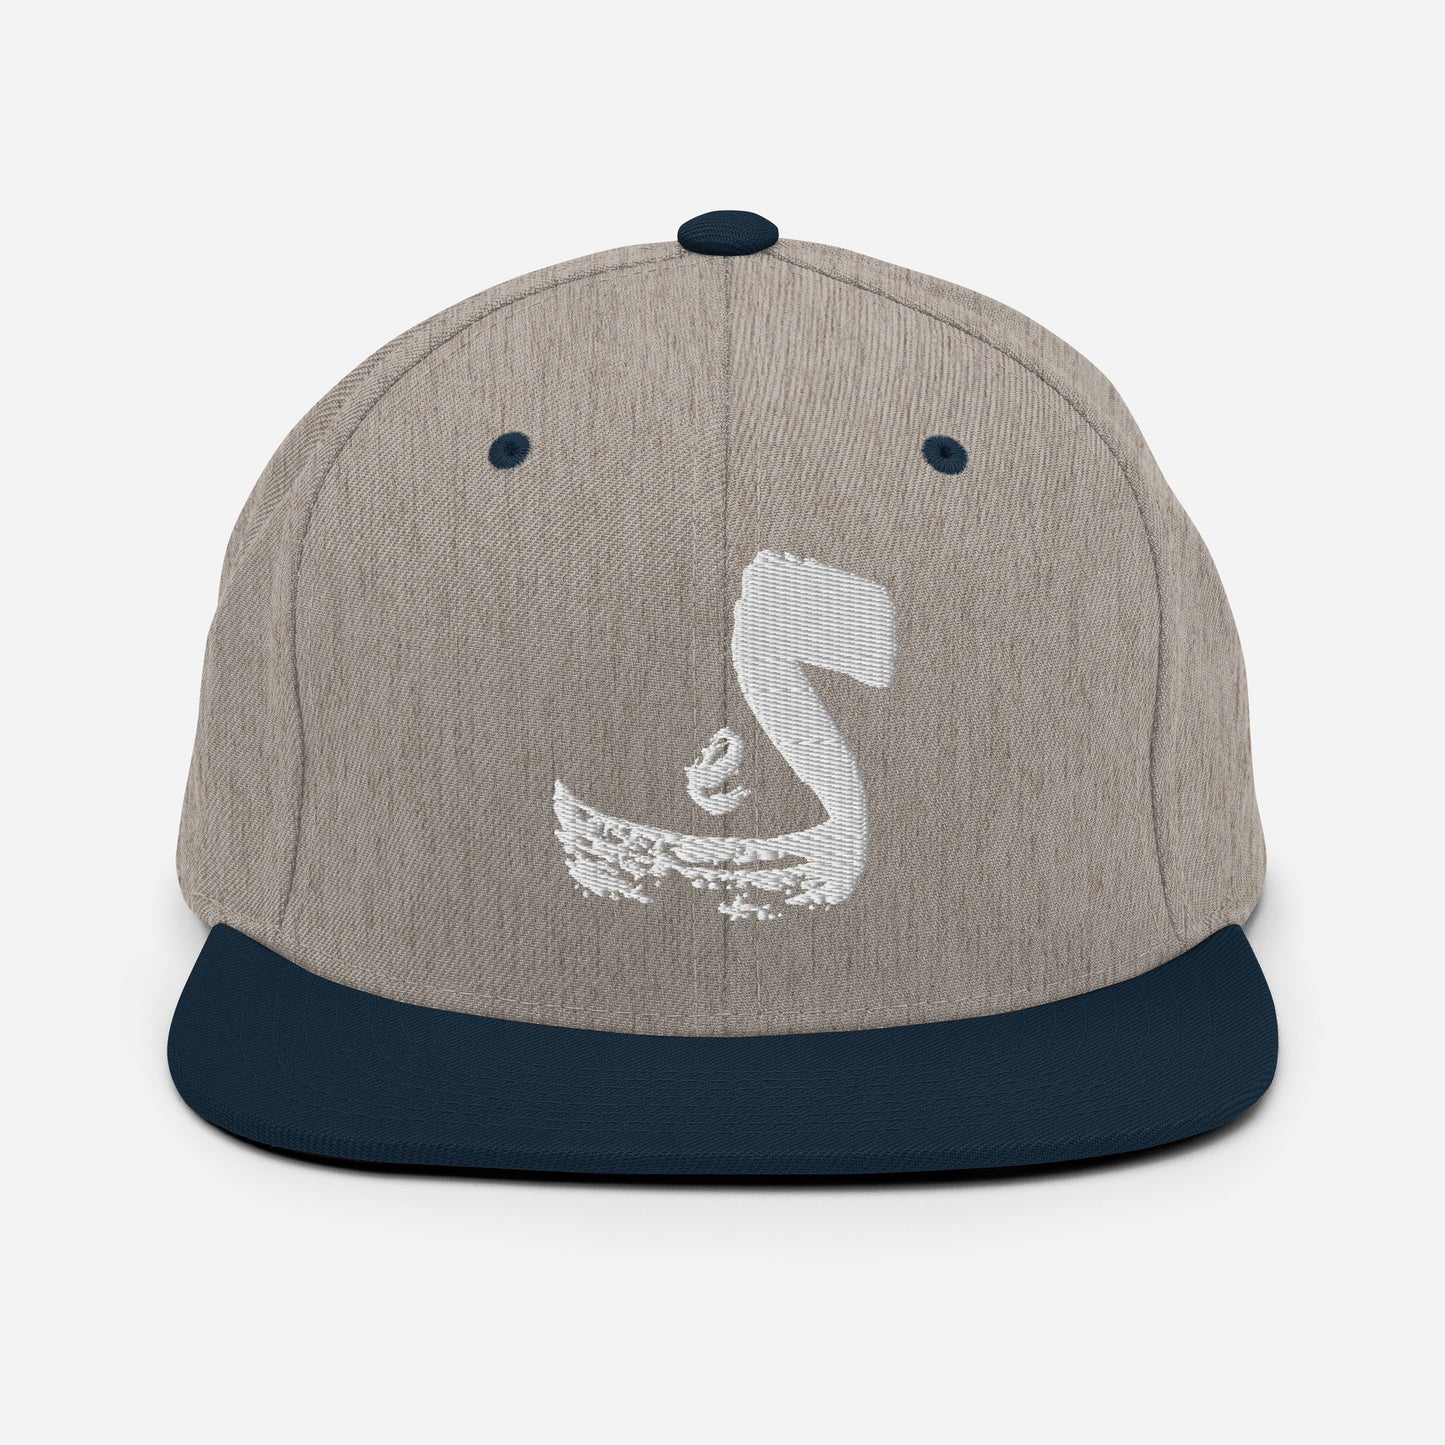 Early Sixteenz Embroidered Snapback Hat